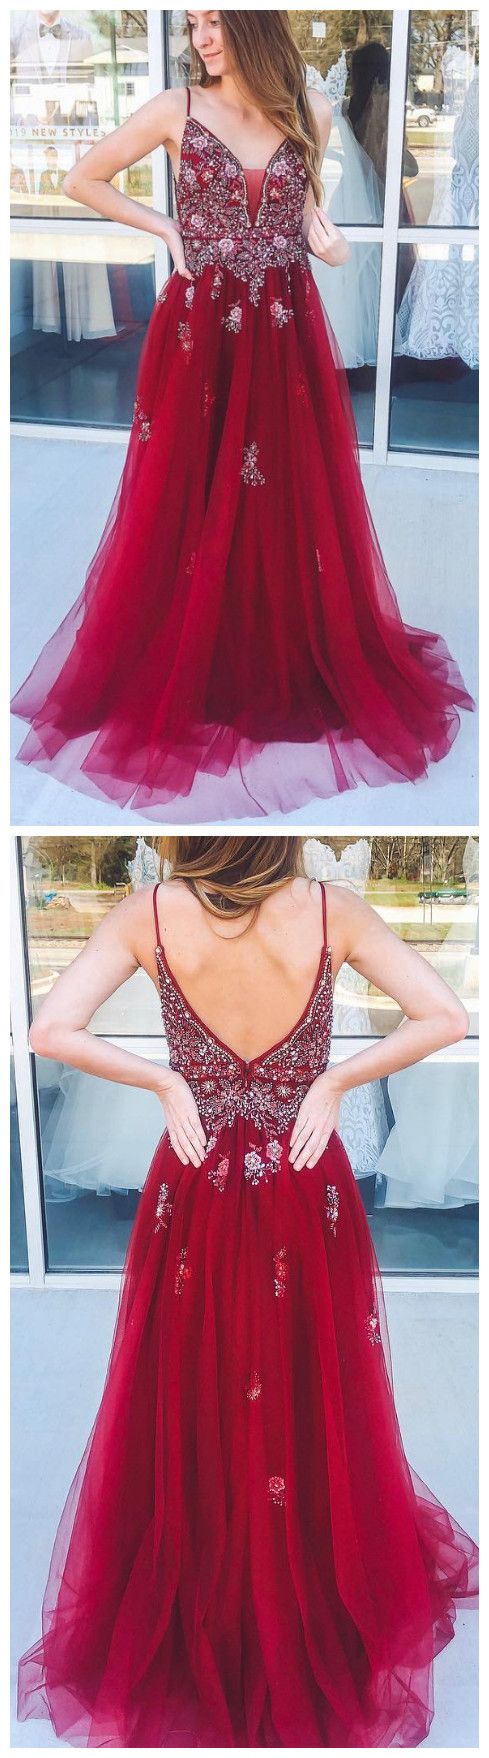 Charming V neck Open Back Red Tulle Long Prom Dress with Spaghetti Straps, Red Evening Dress cg2652